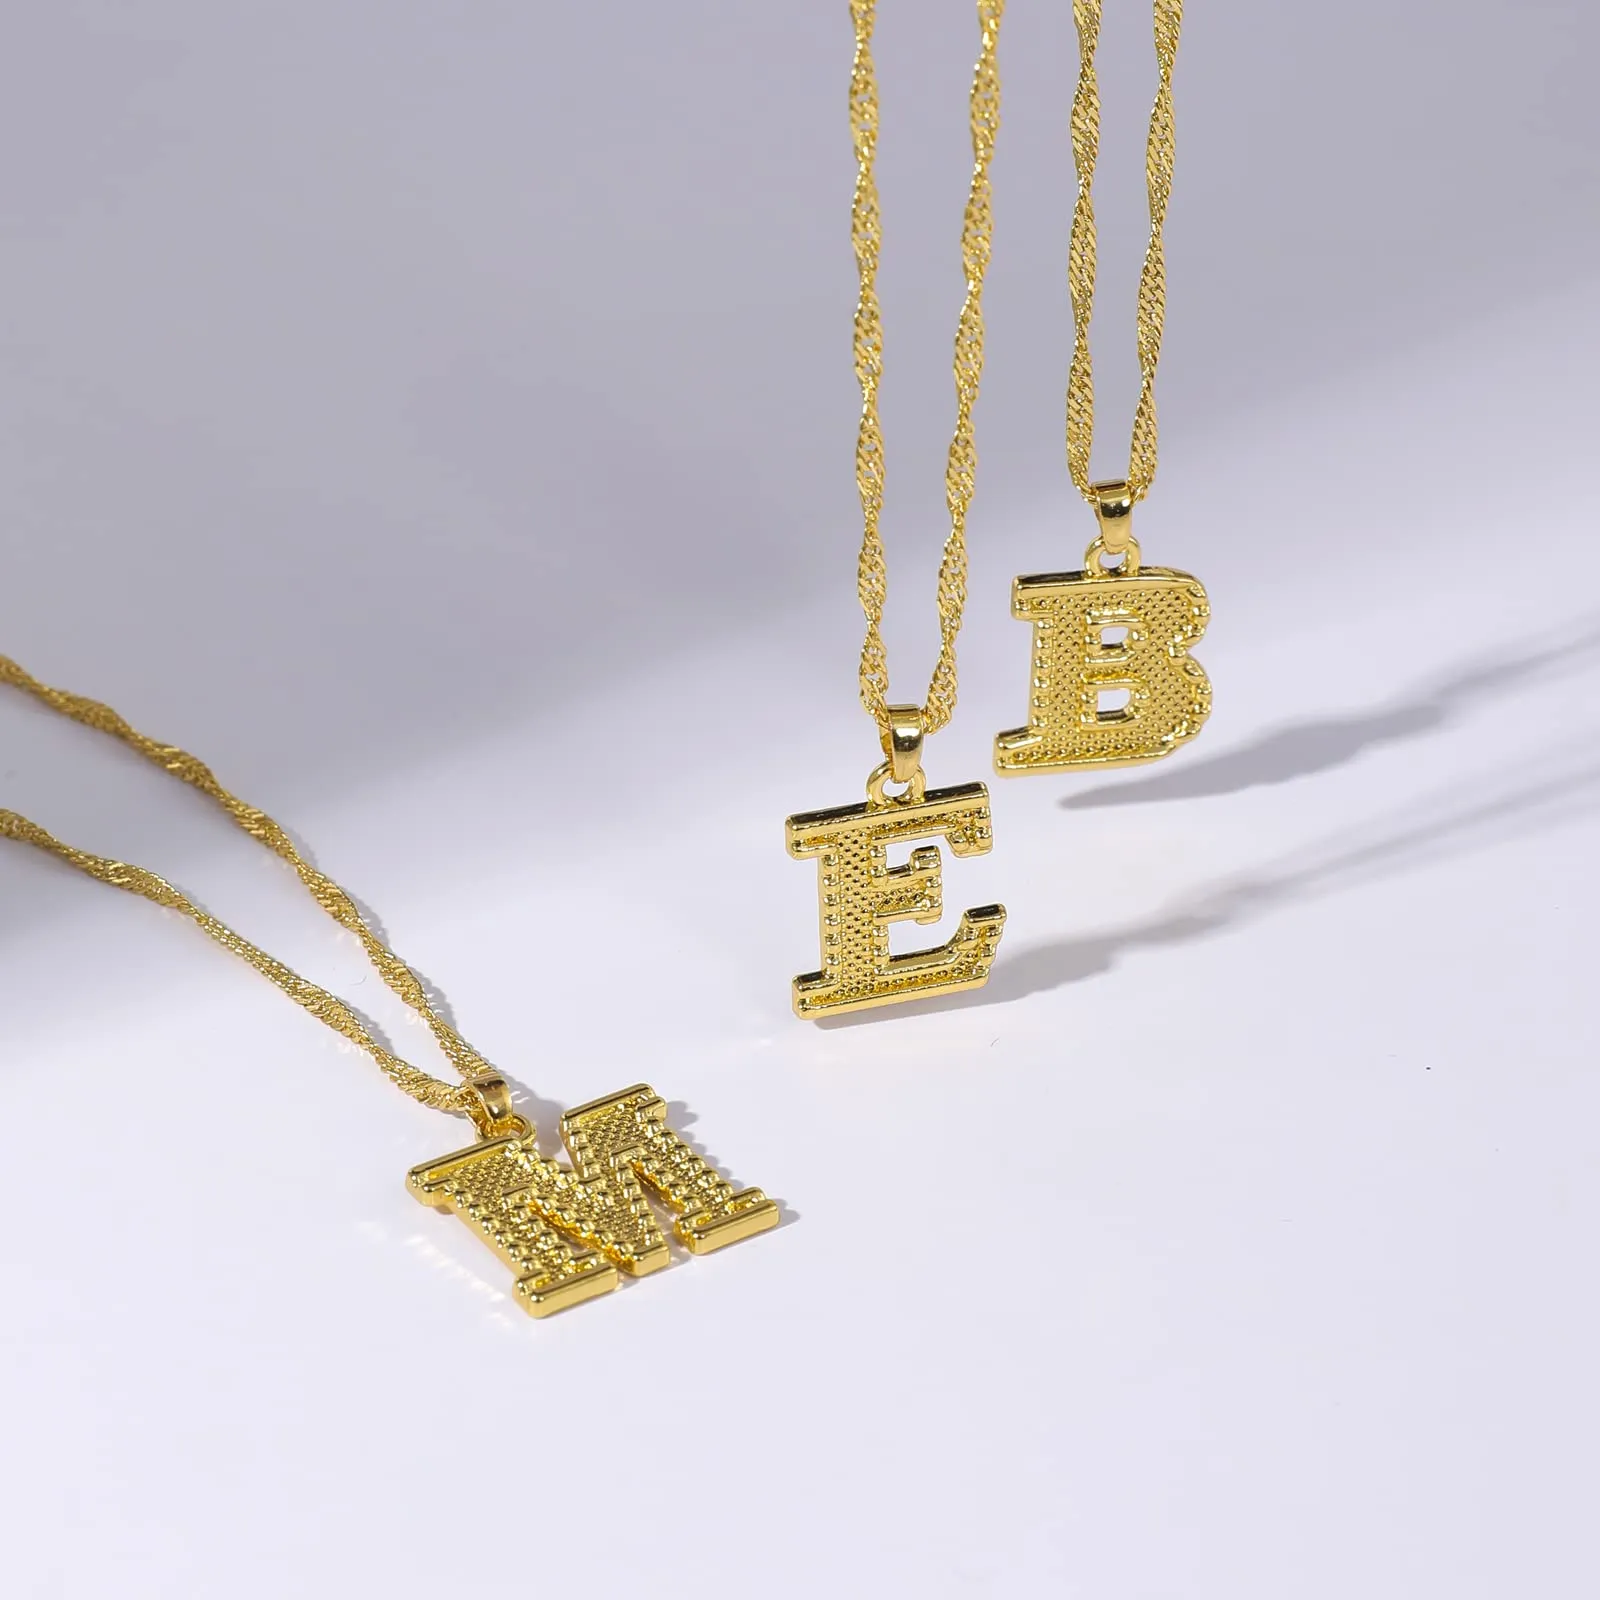 3ml dainty initial necklaces for women 26 alphabet pendant chain necklace from az 18k gold plated name letter pendant charm necklace for mens women simple cute punk rock reggae gifts for girls